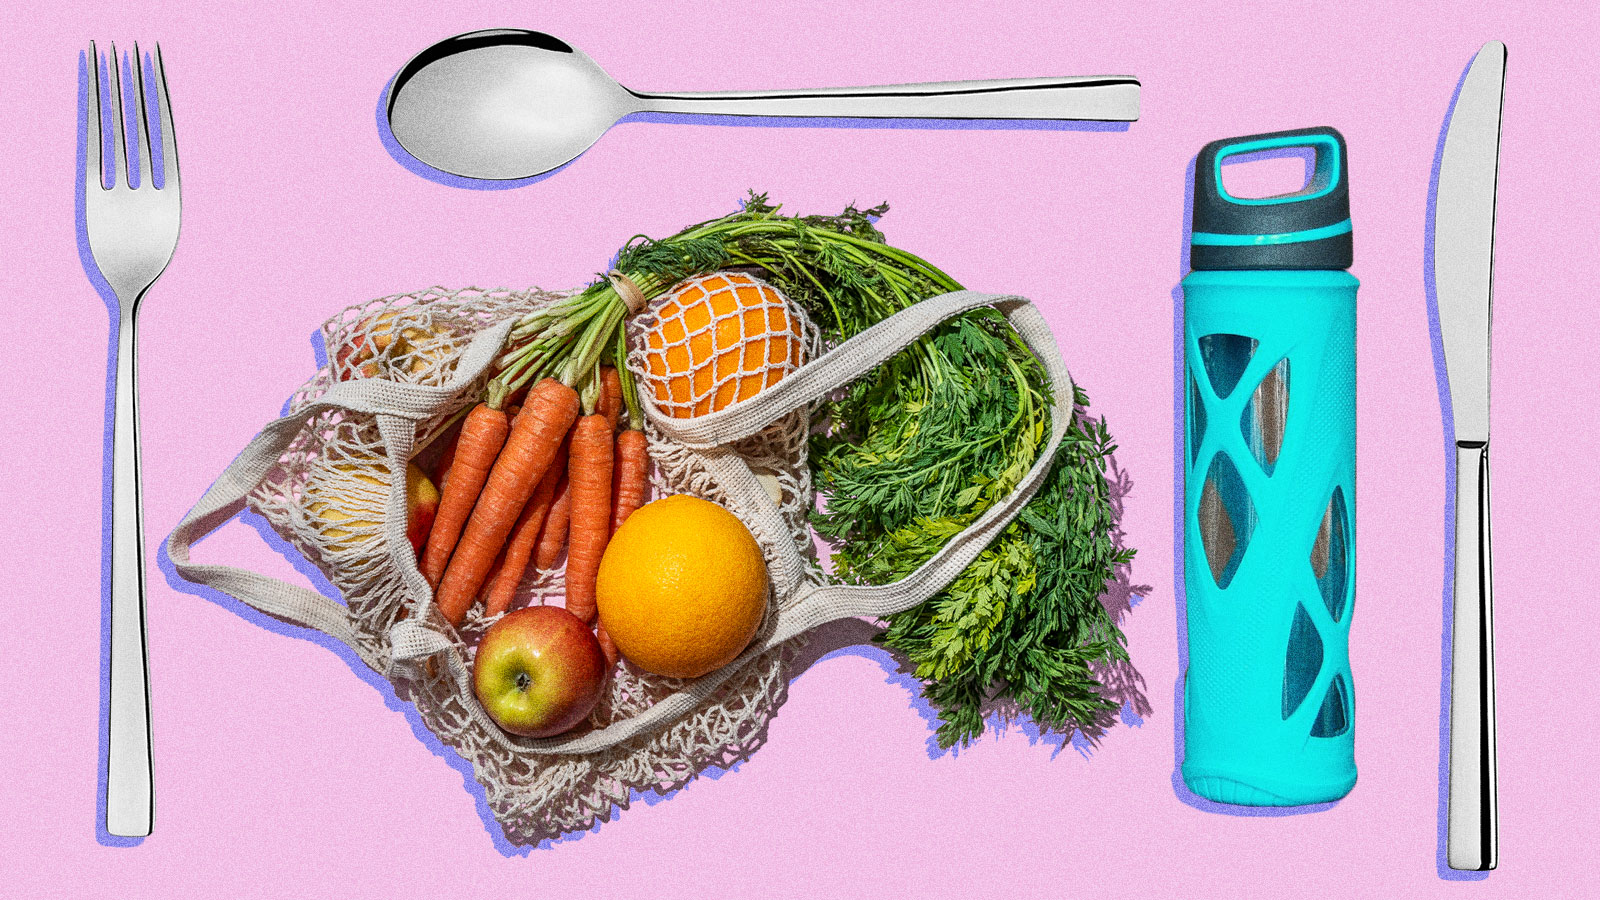 A variety of reusable objects - silverware, a reusable grocery bag, a water bottle - on a pink background